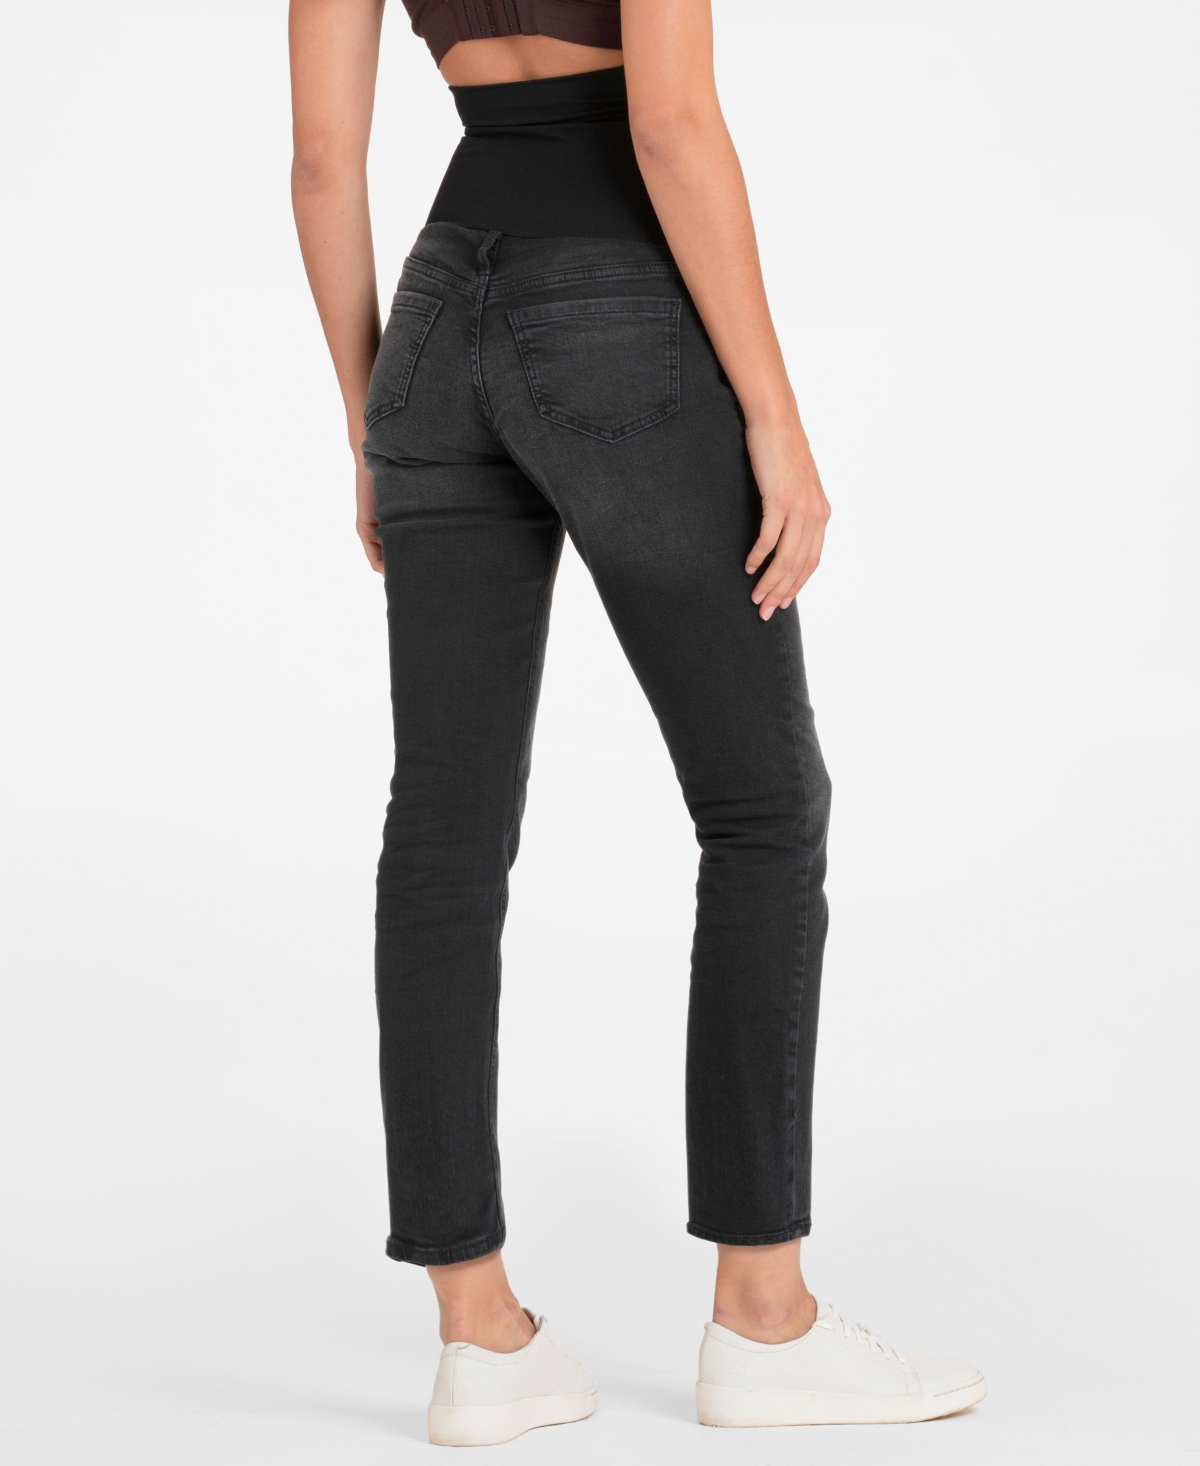 Shop Seraphine Women's Slim Post Maternity Shaping Jeans In Black